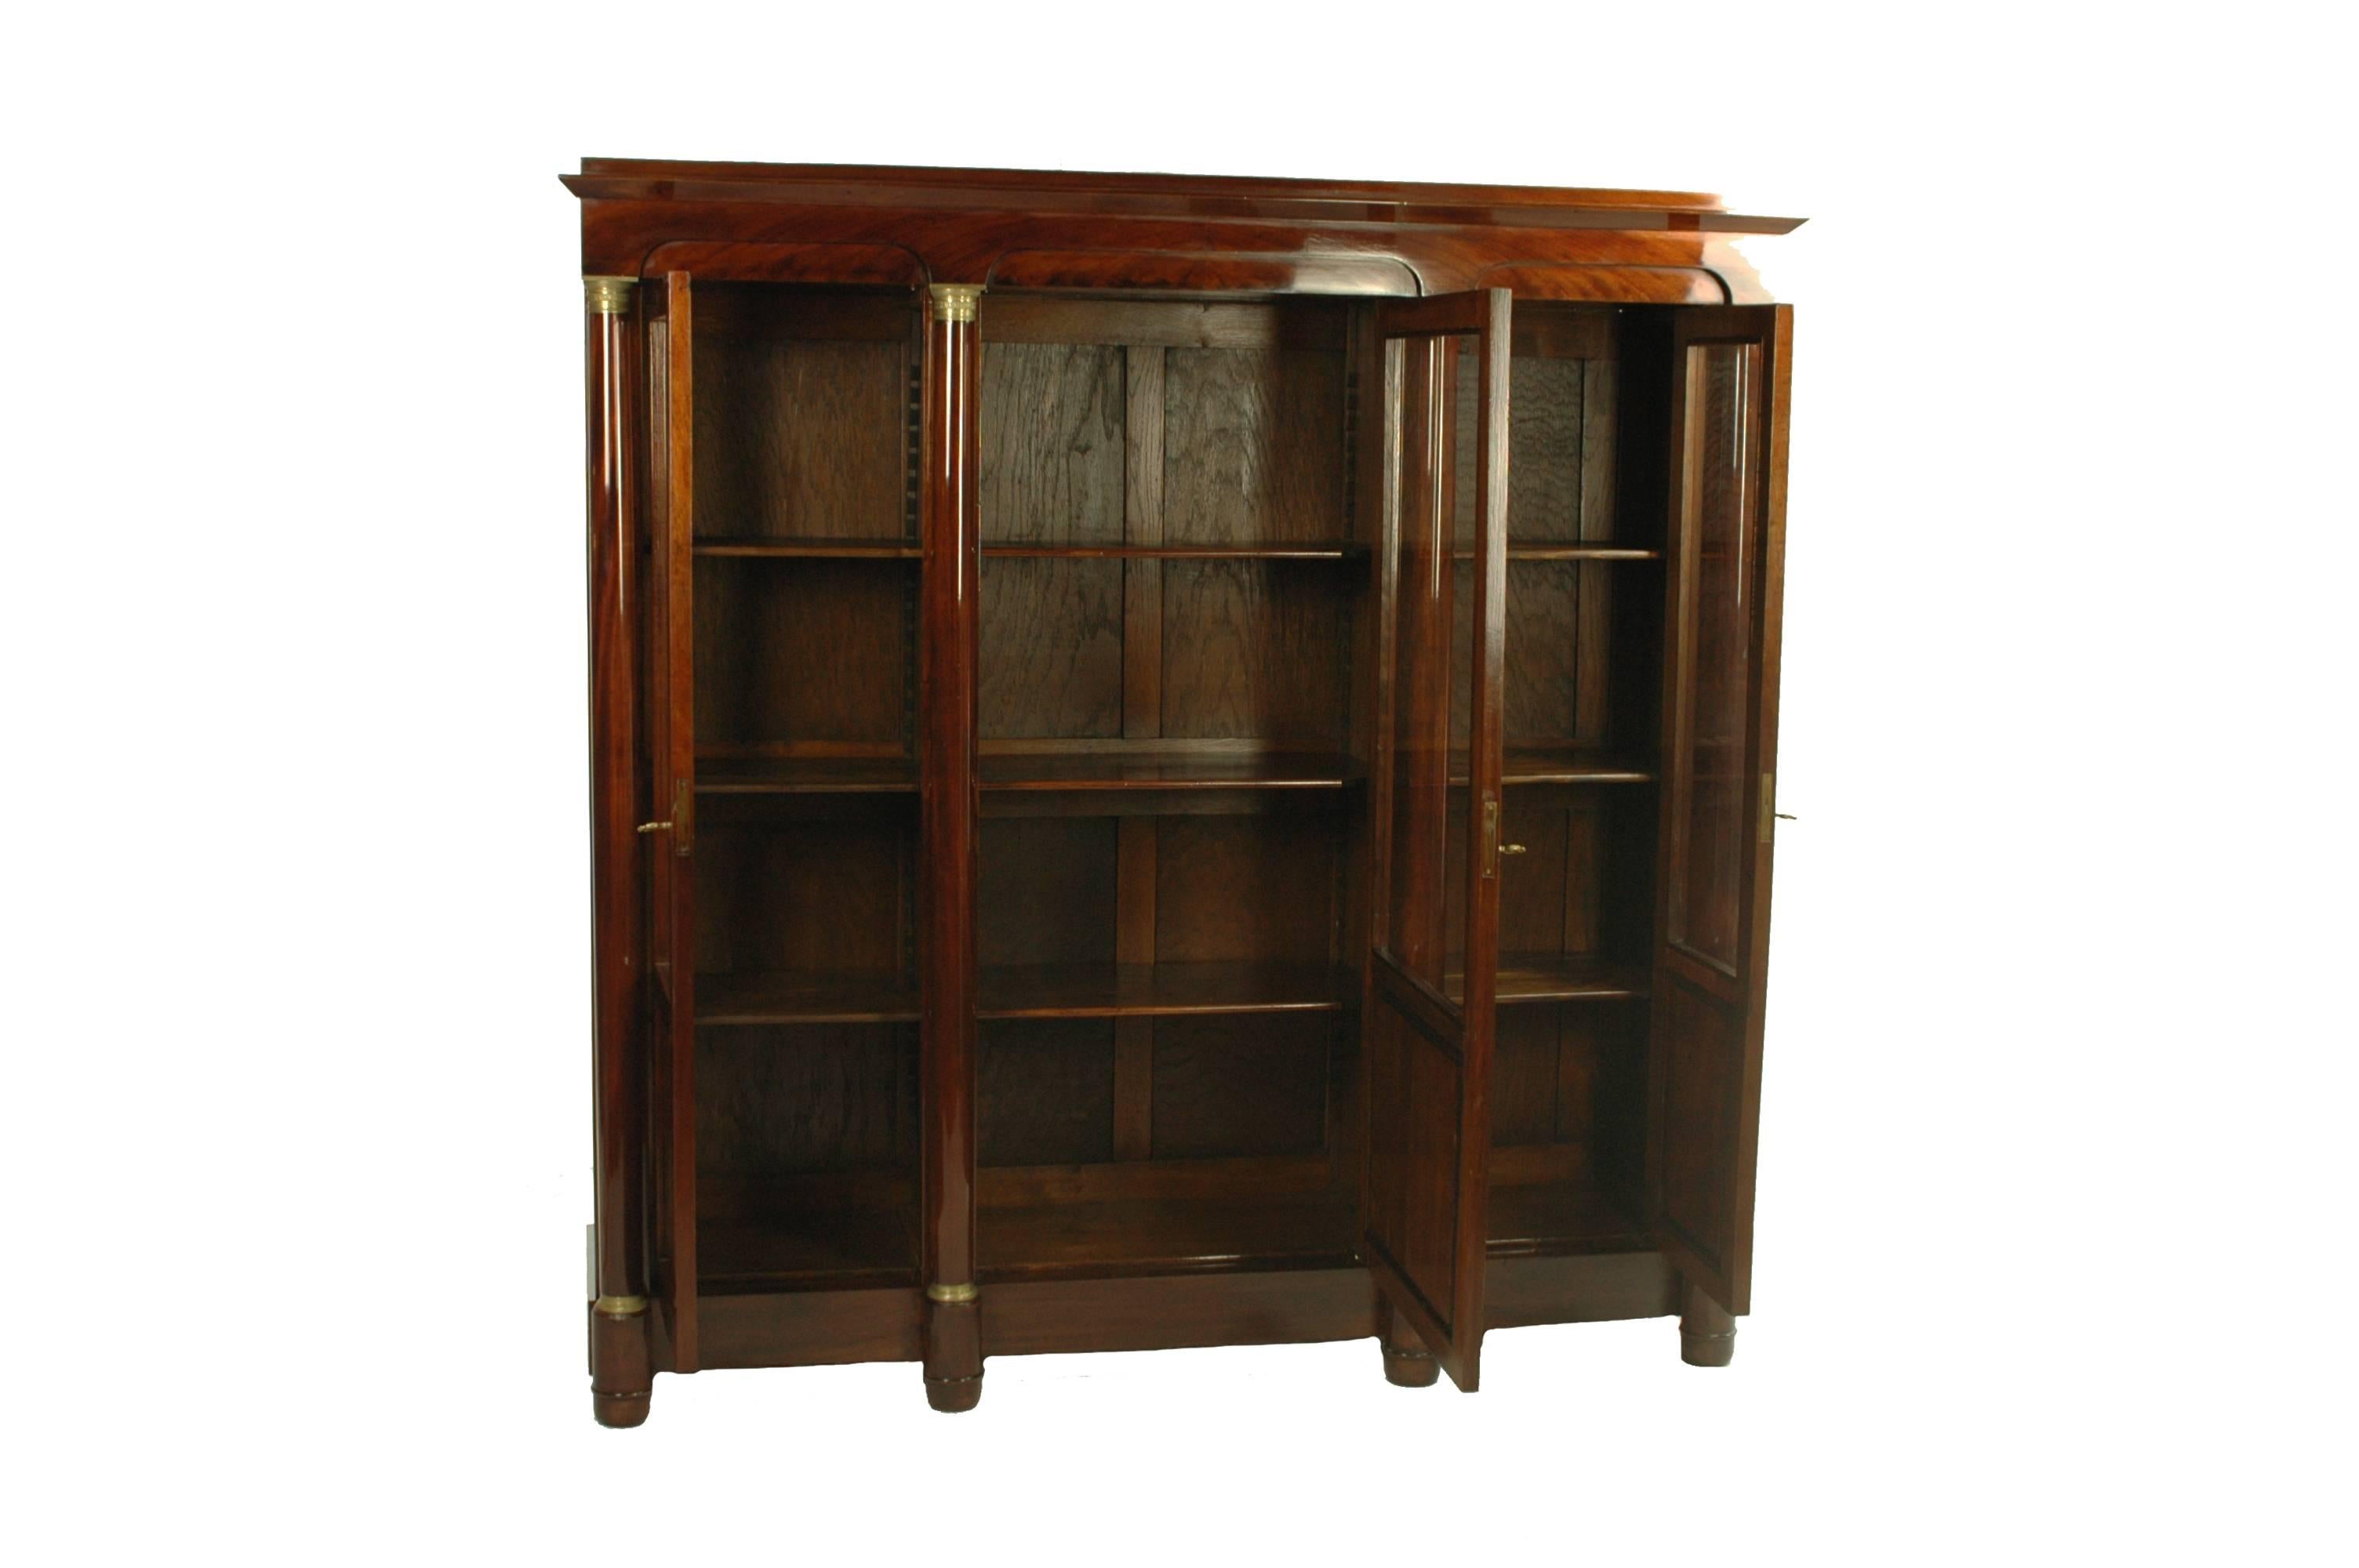 Unique and rare late Biedermeier period glass cabinet circa 1850 crafted in mahogany veneered. It is in perfect original condition, only the glass has been renewed during the restoration progress. The larger middle door and the 2 smaller doors to